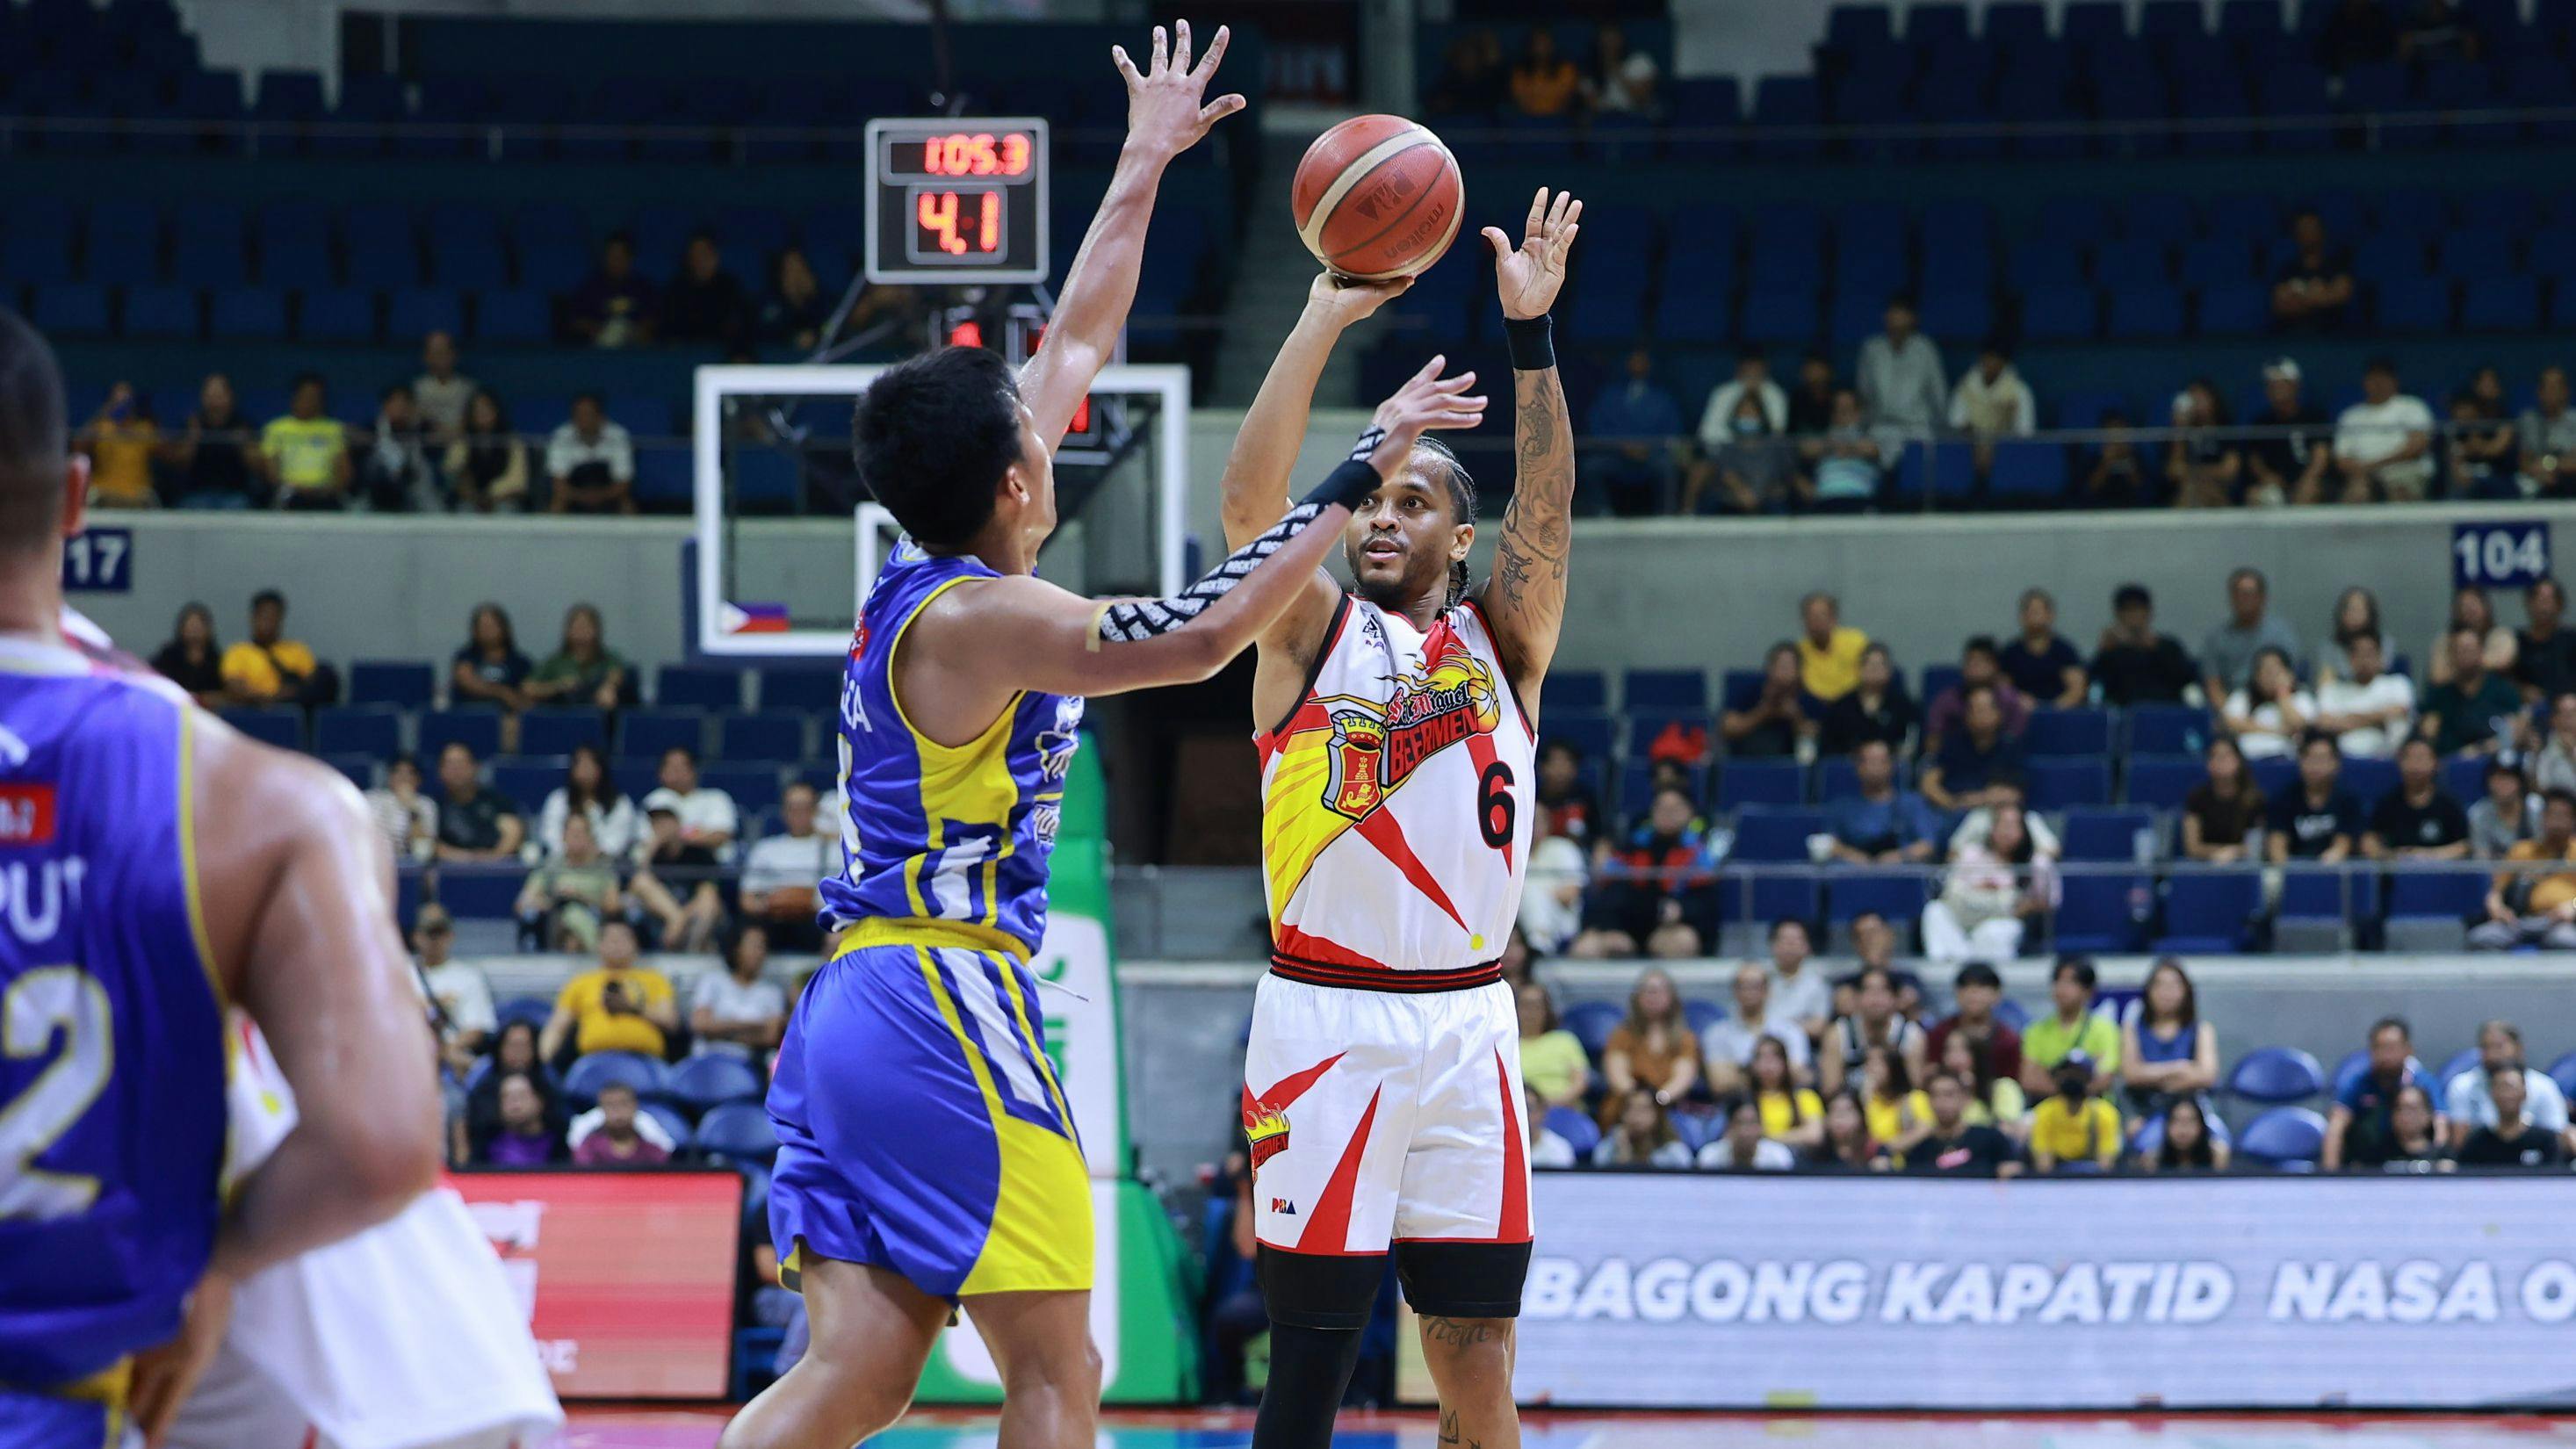 PBA: Chris Ross heats up as San Miguel outlasts Magnolia for perfect 8-0 record